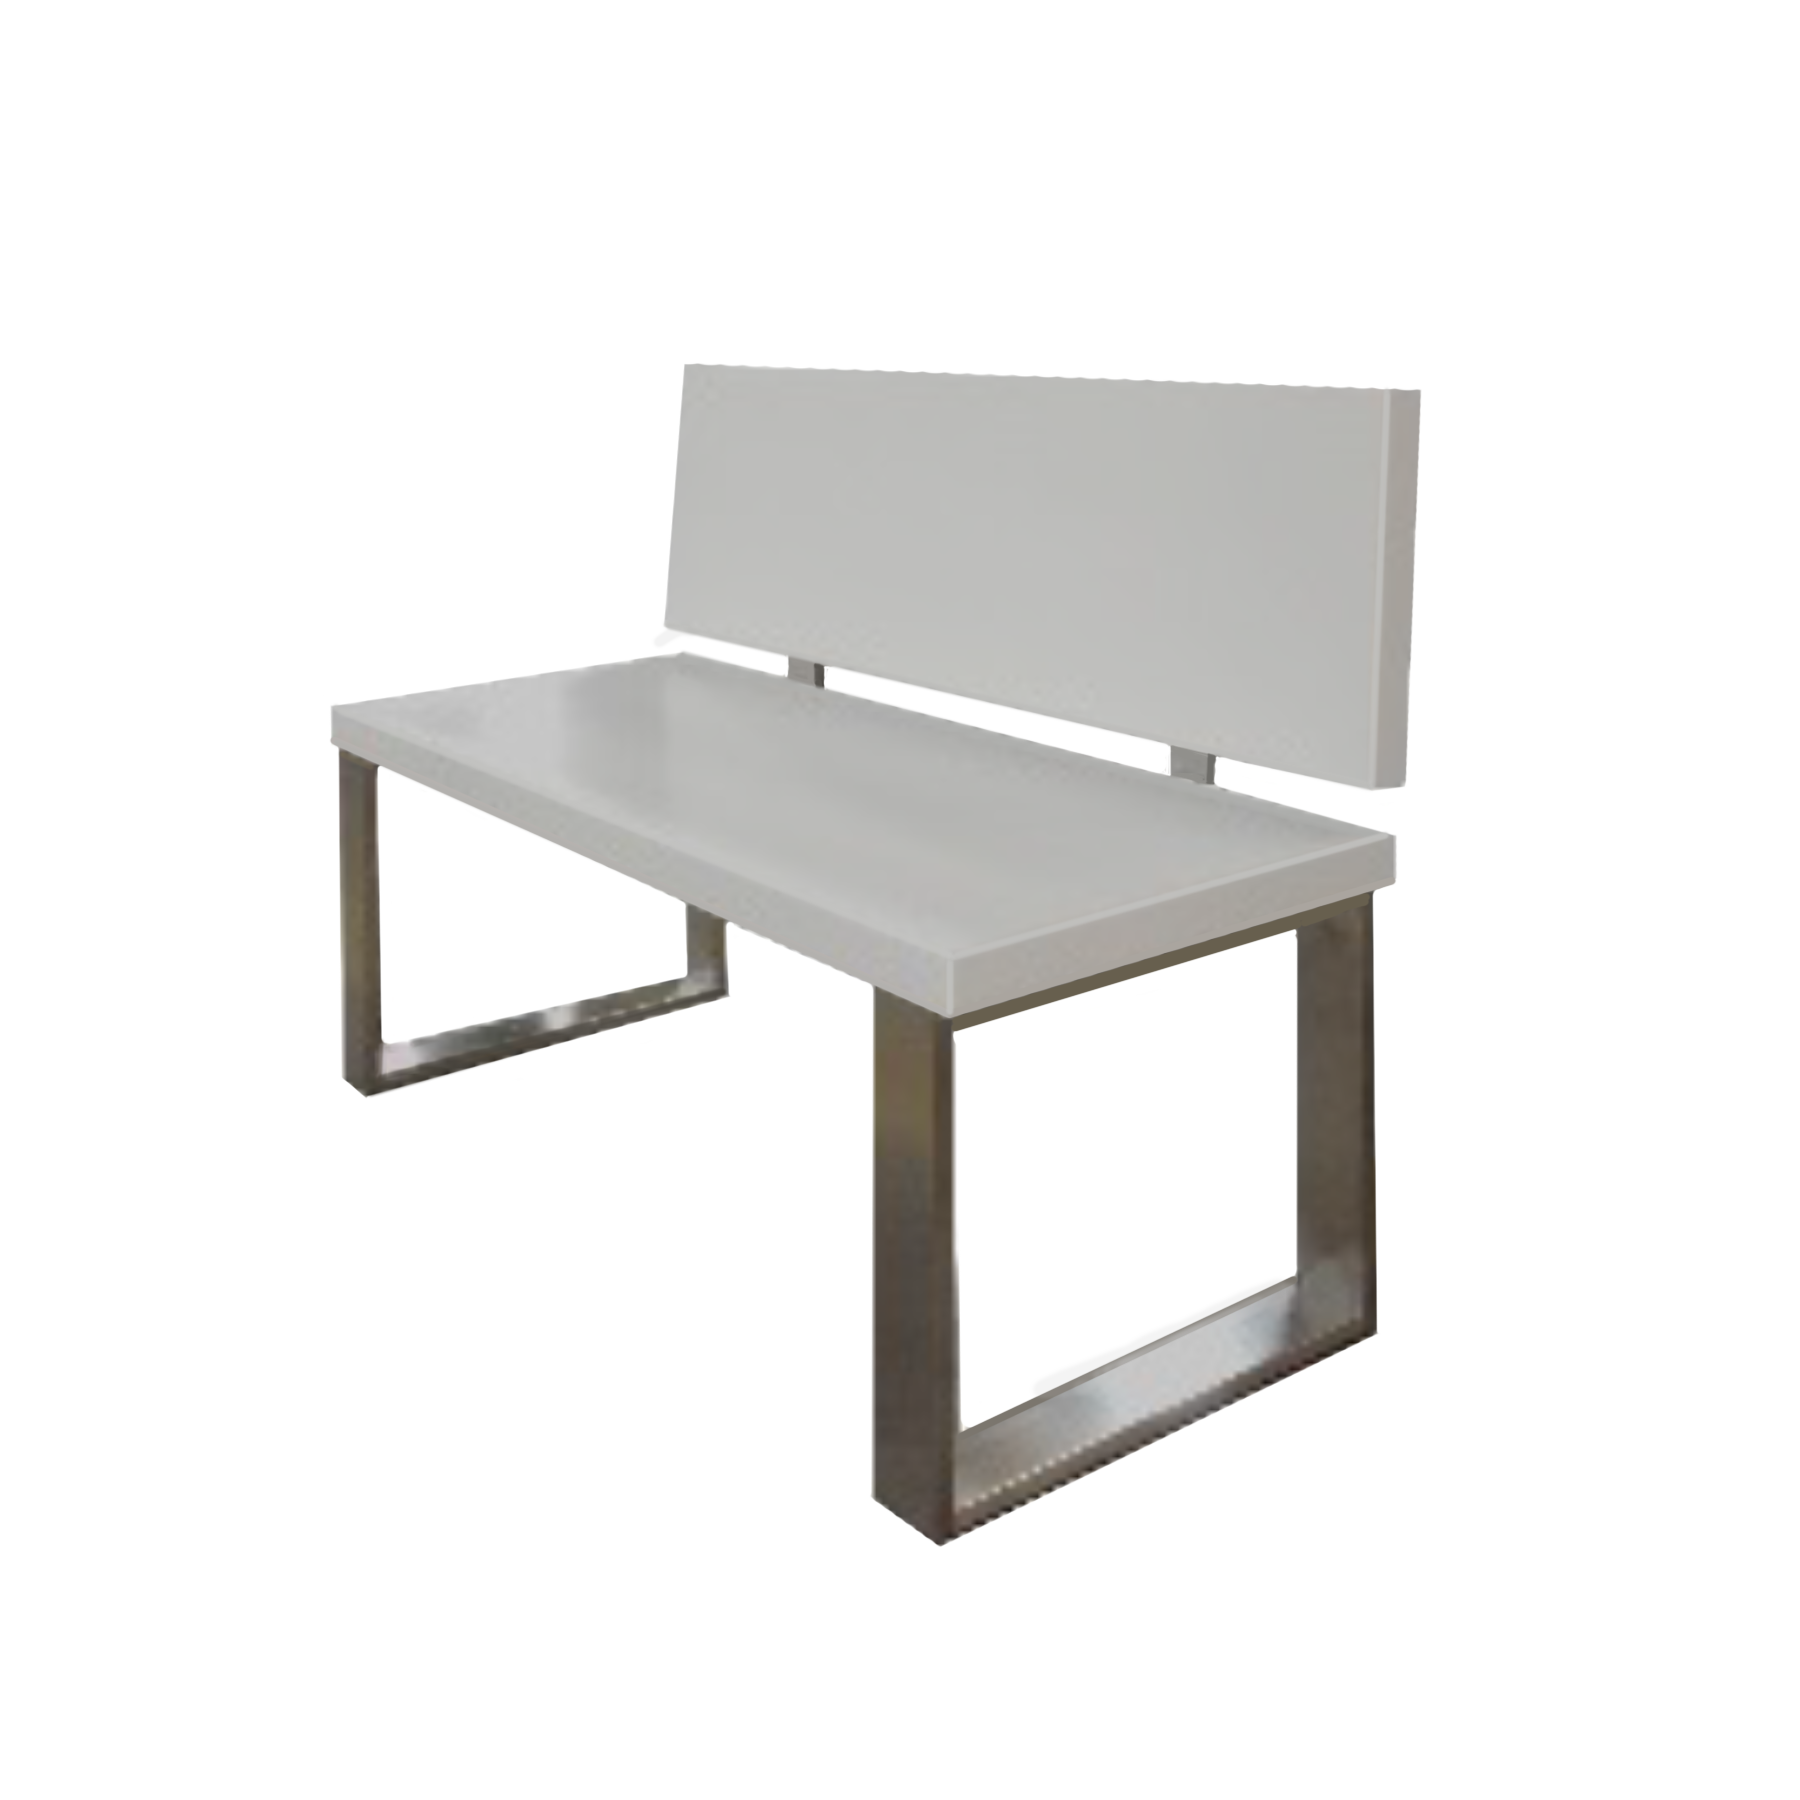 Ada Compliant Bench Designed For Locker Rooms By Hollman